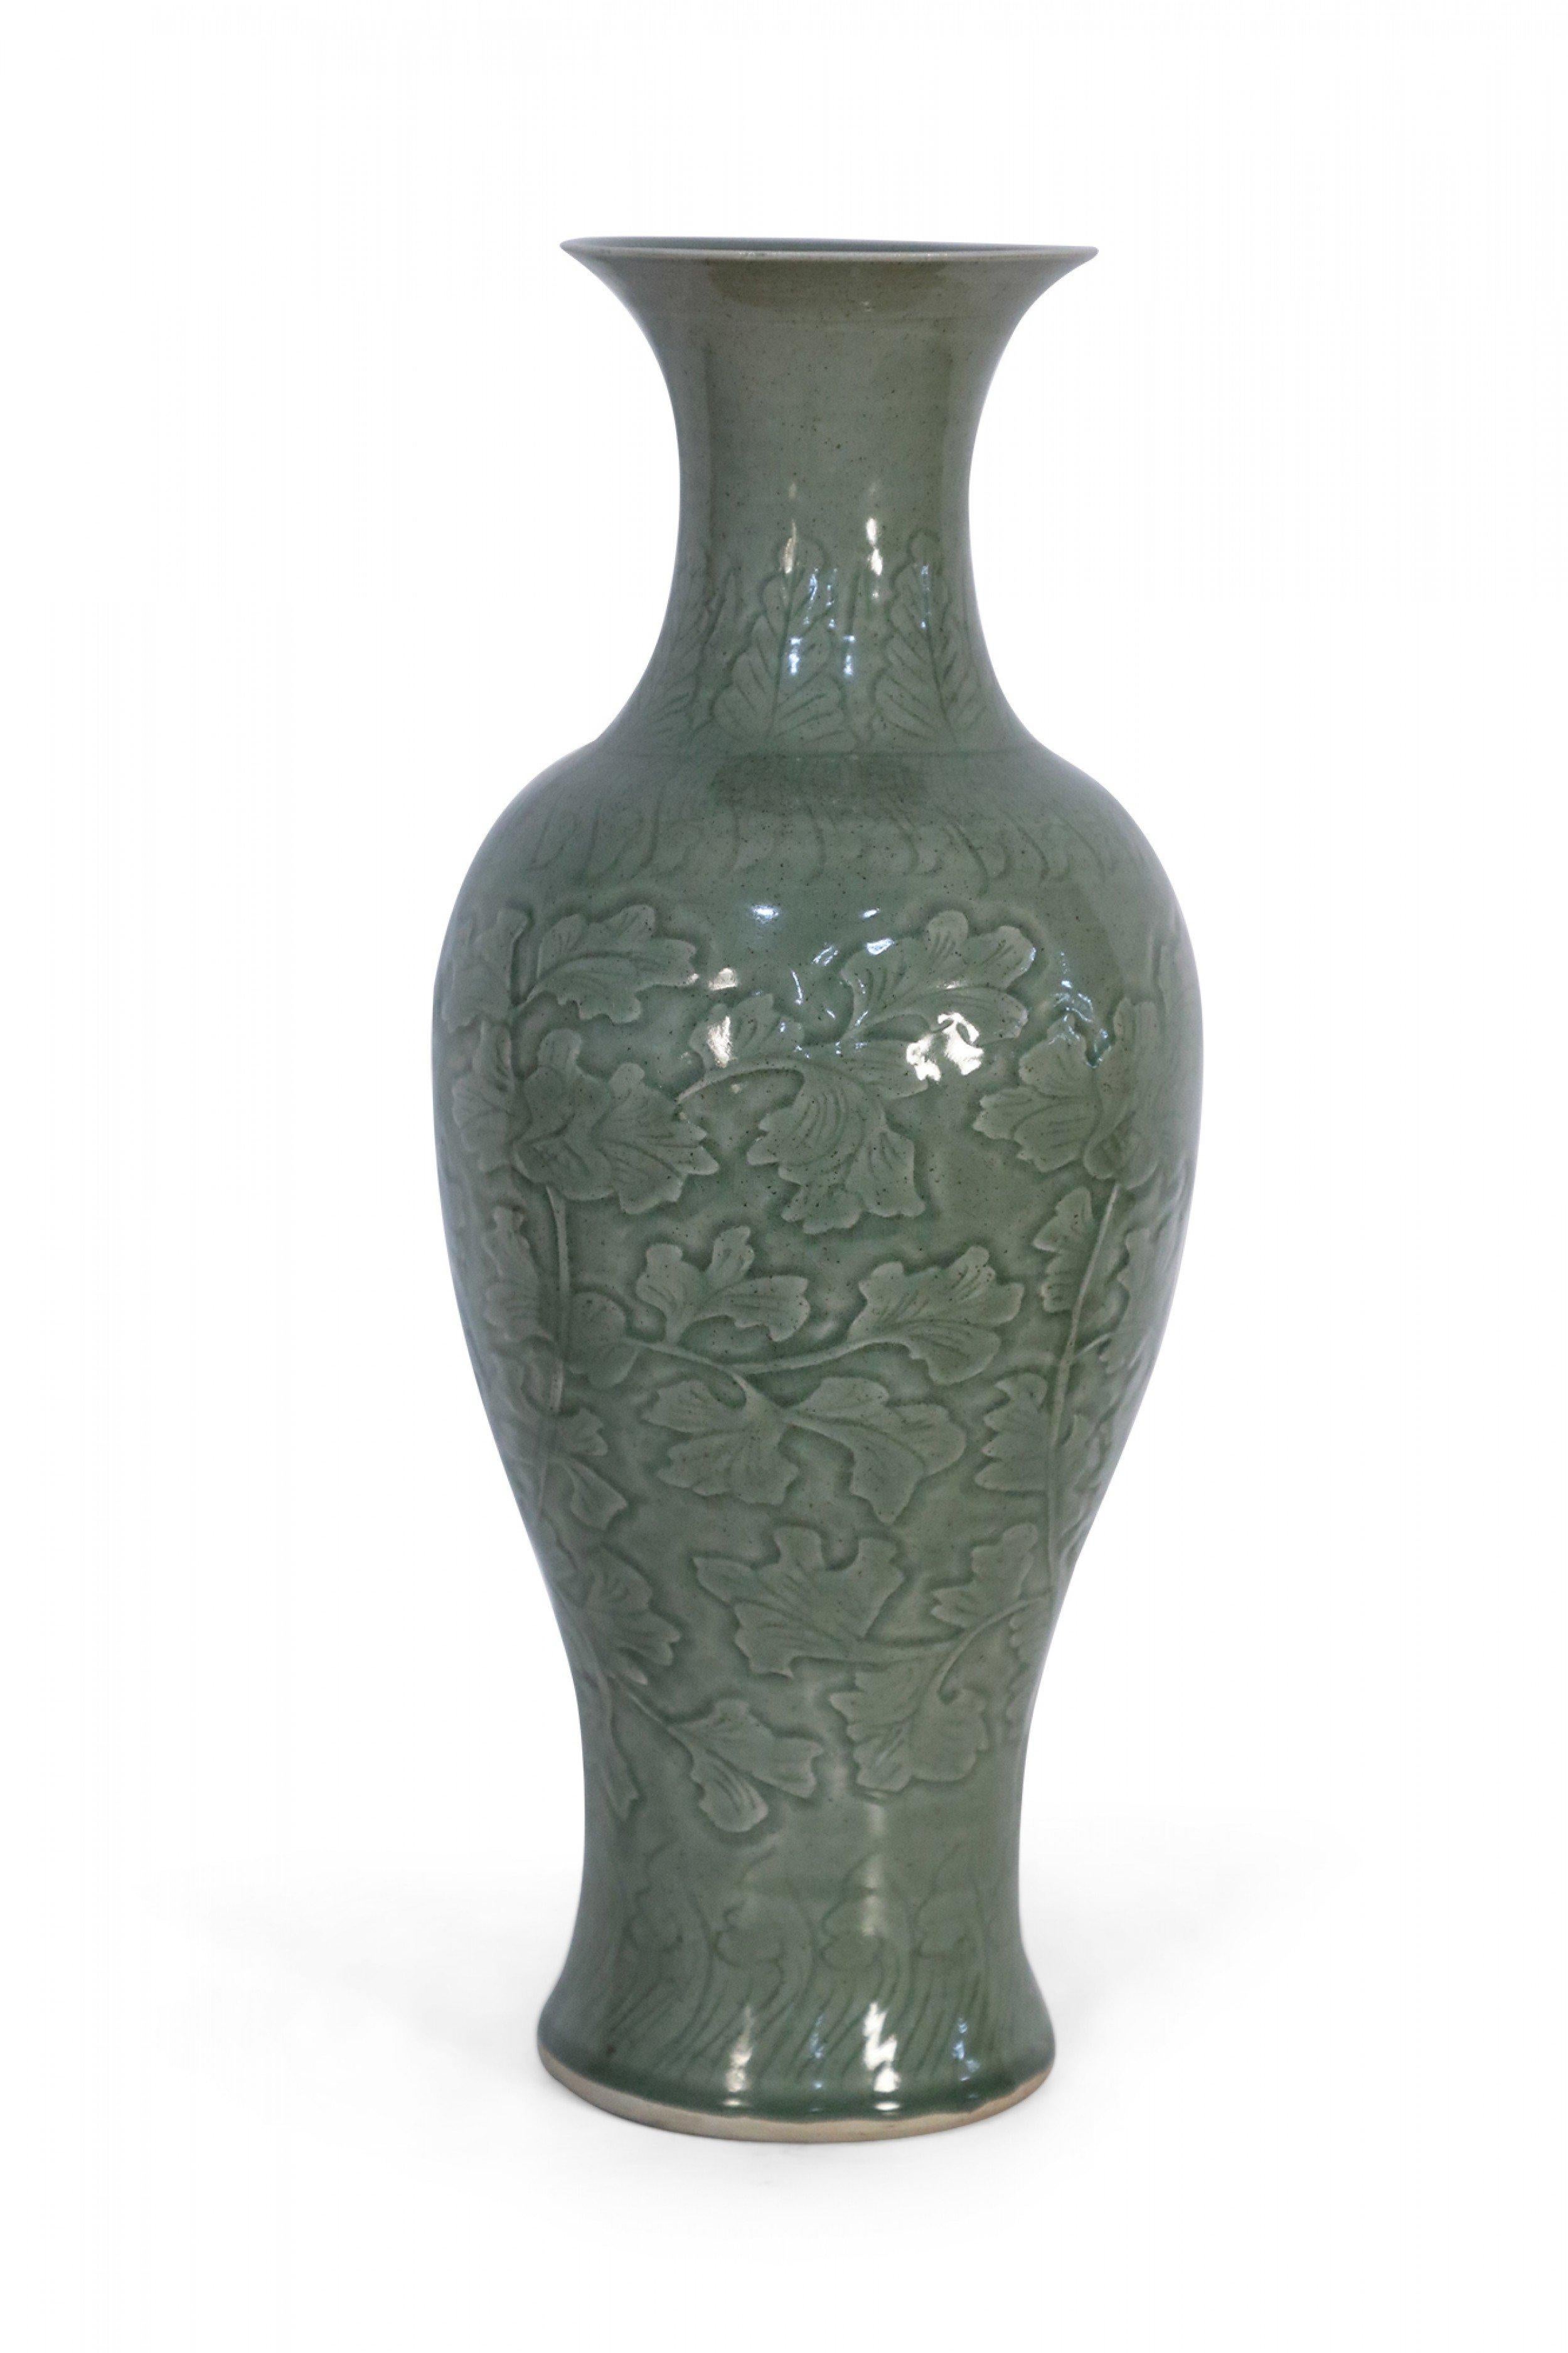 Chinese sage-colored porcelain vase decorated in an incised floral and swirling pattern that travels up the curves of the body to the concave neck, before the shape flares out once again at the trumpeted opening.
 